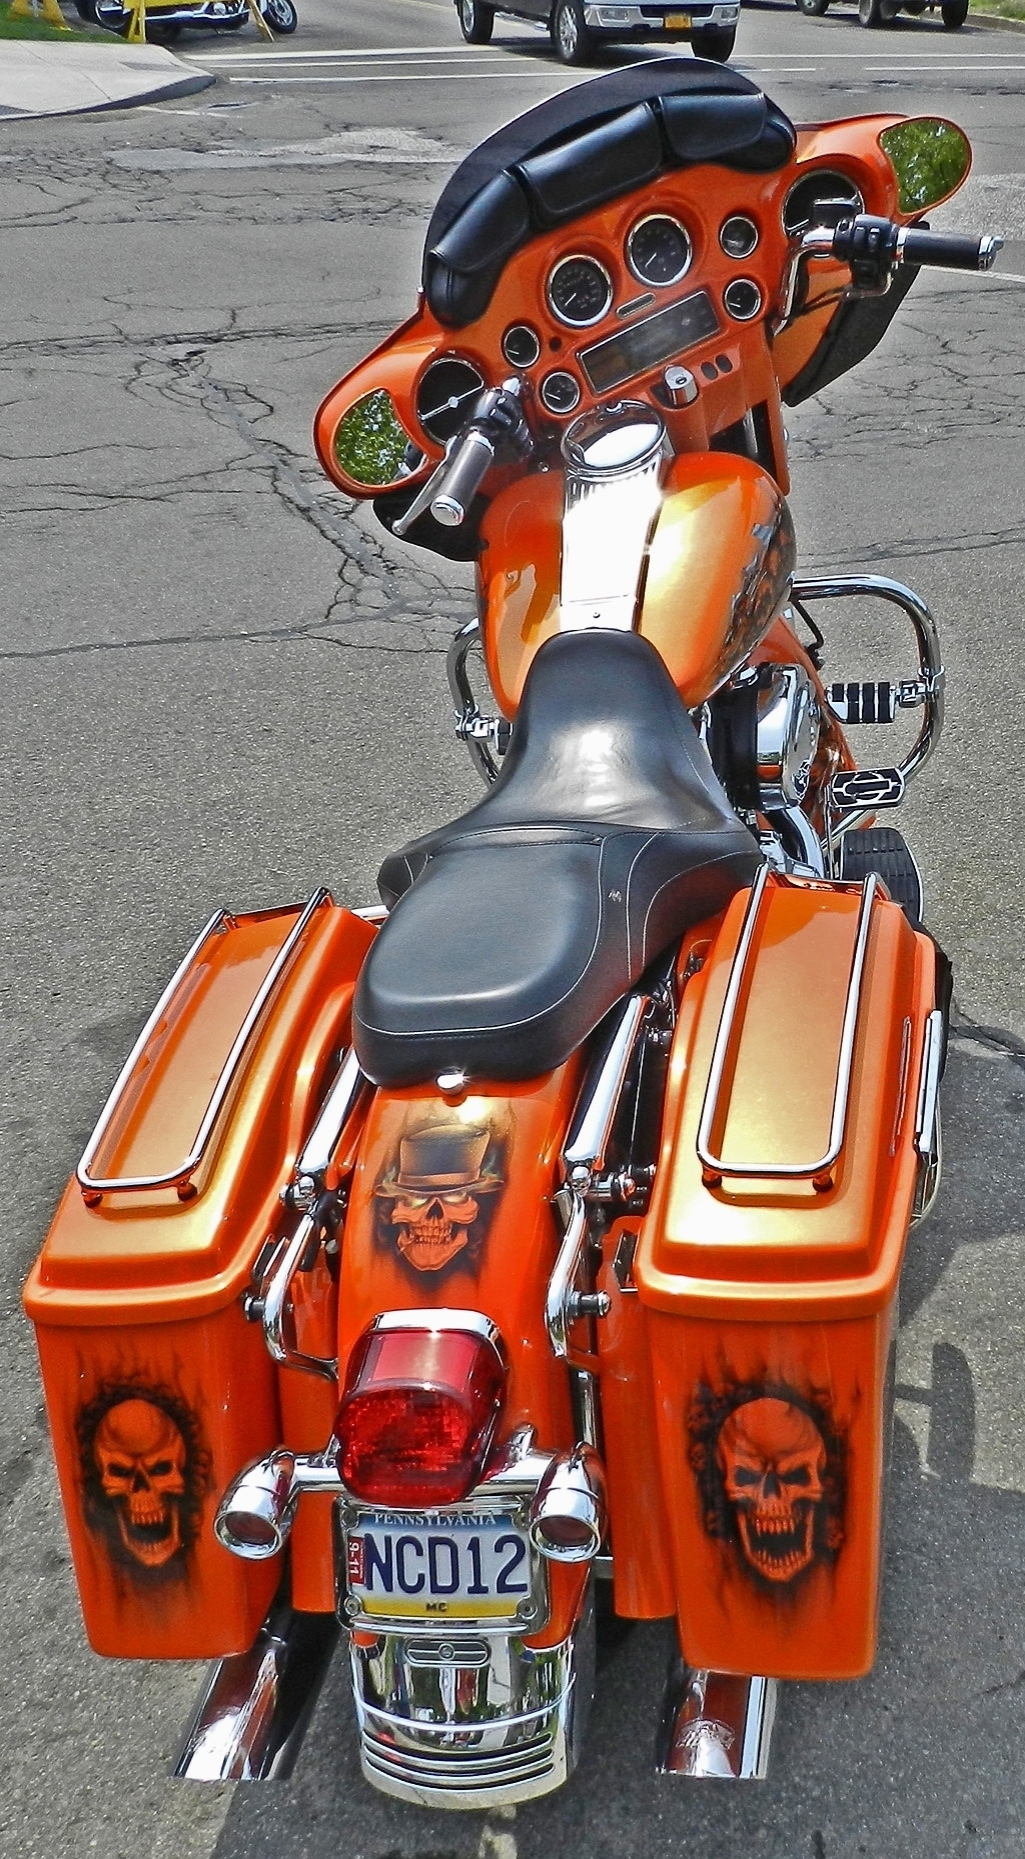 this motorcyle is designed in the colors of an orange with skulls